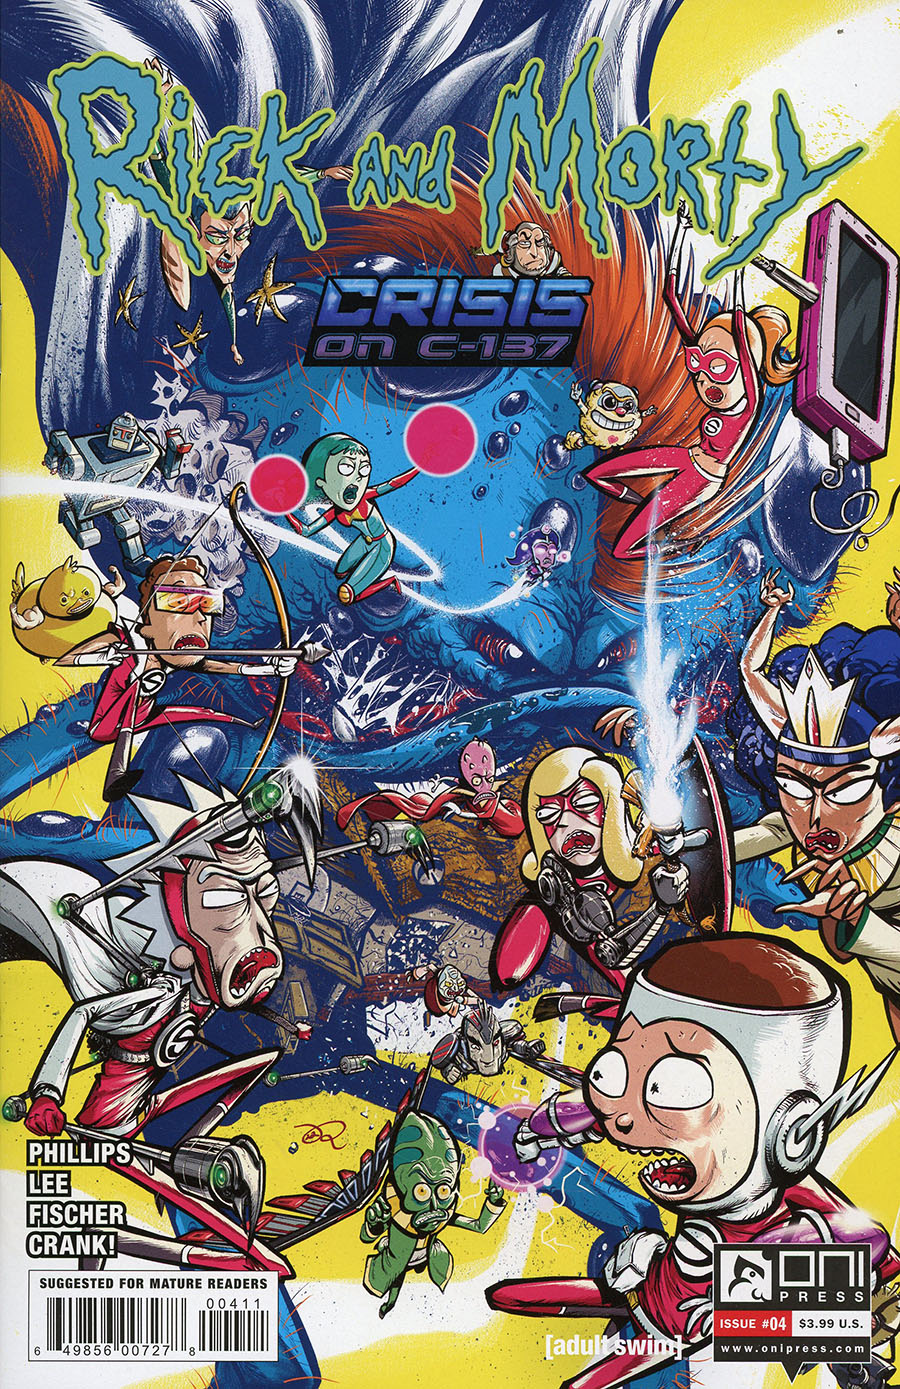 Rick And Morty Crisis On C-137 #4 Cover A Regular Ryan Lee Cover